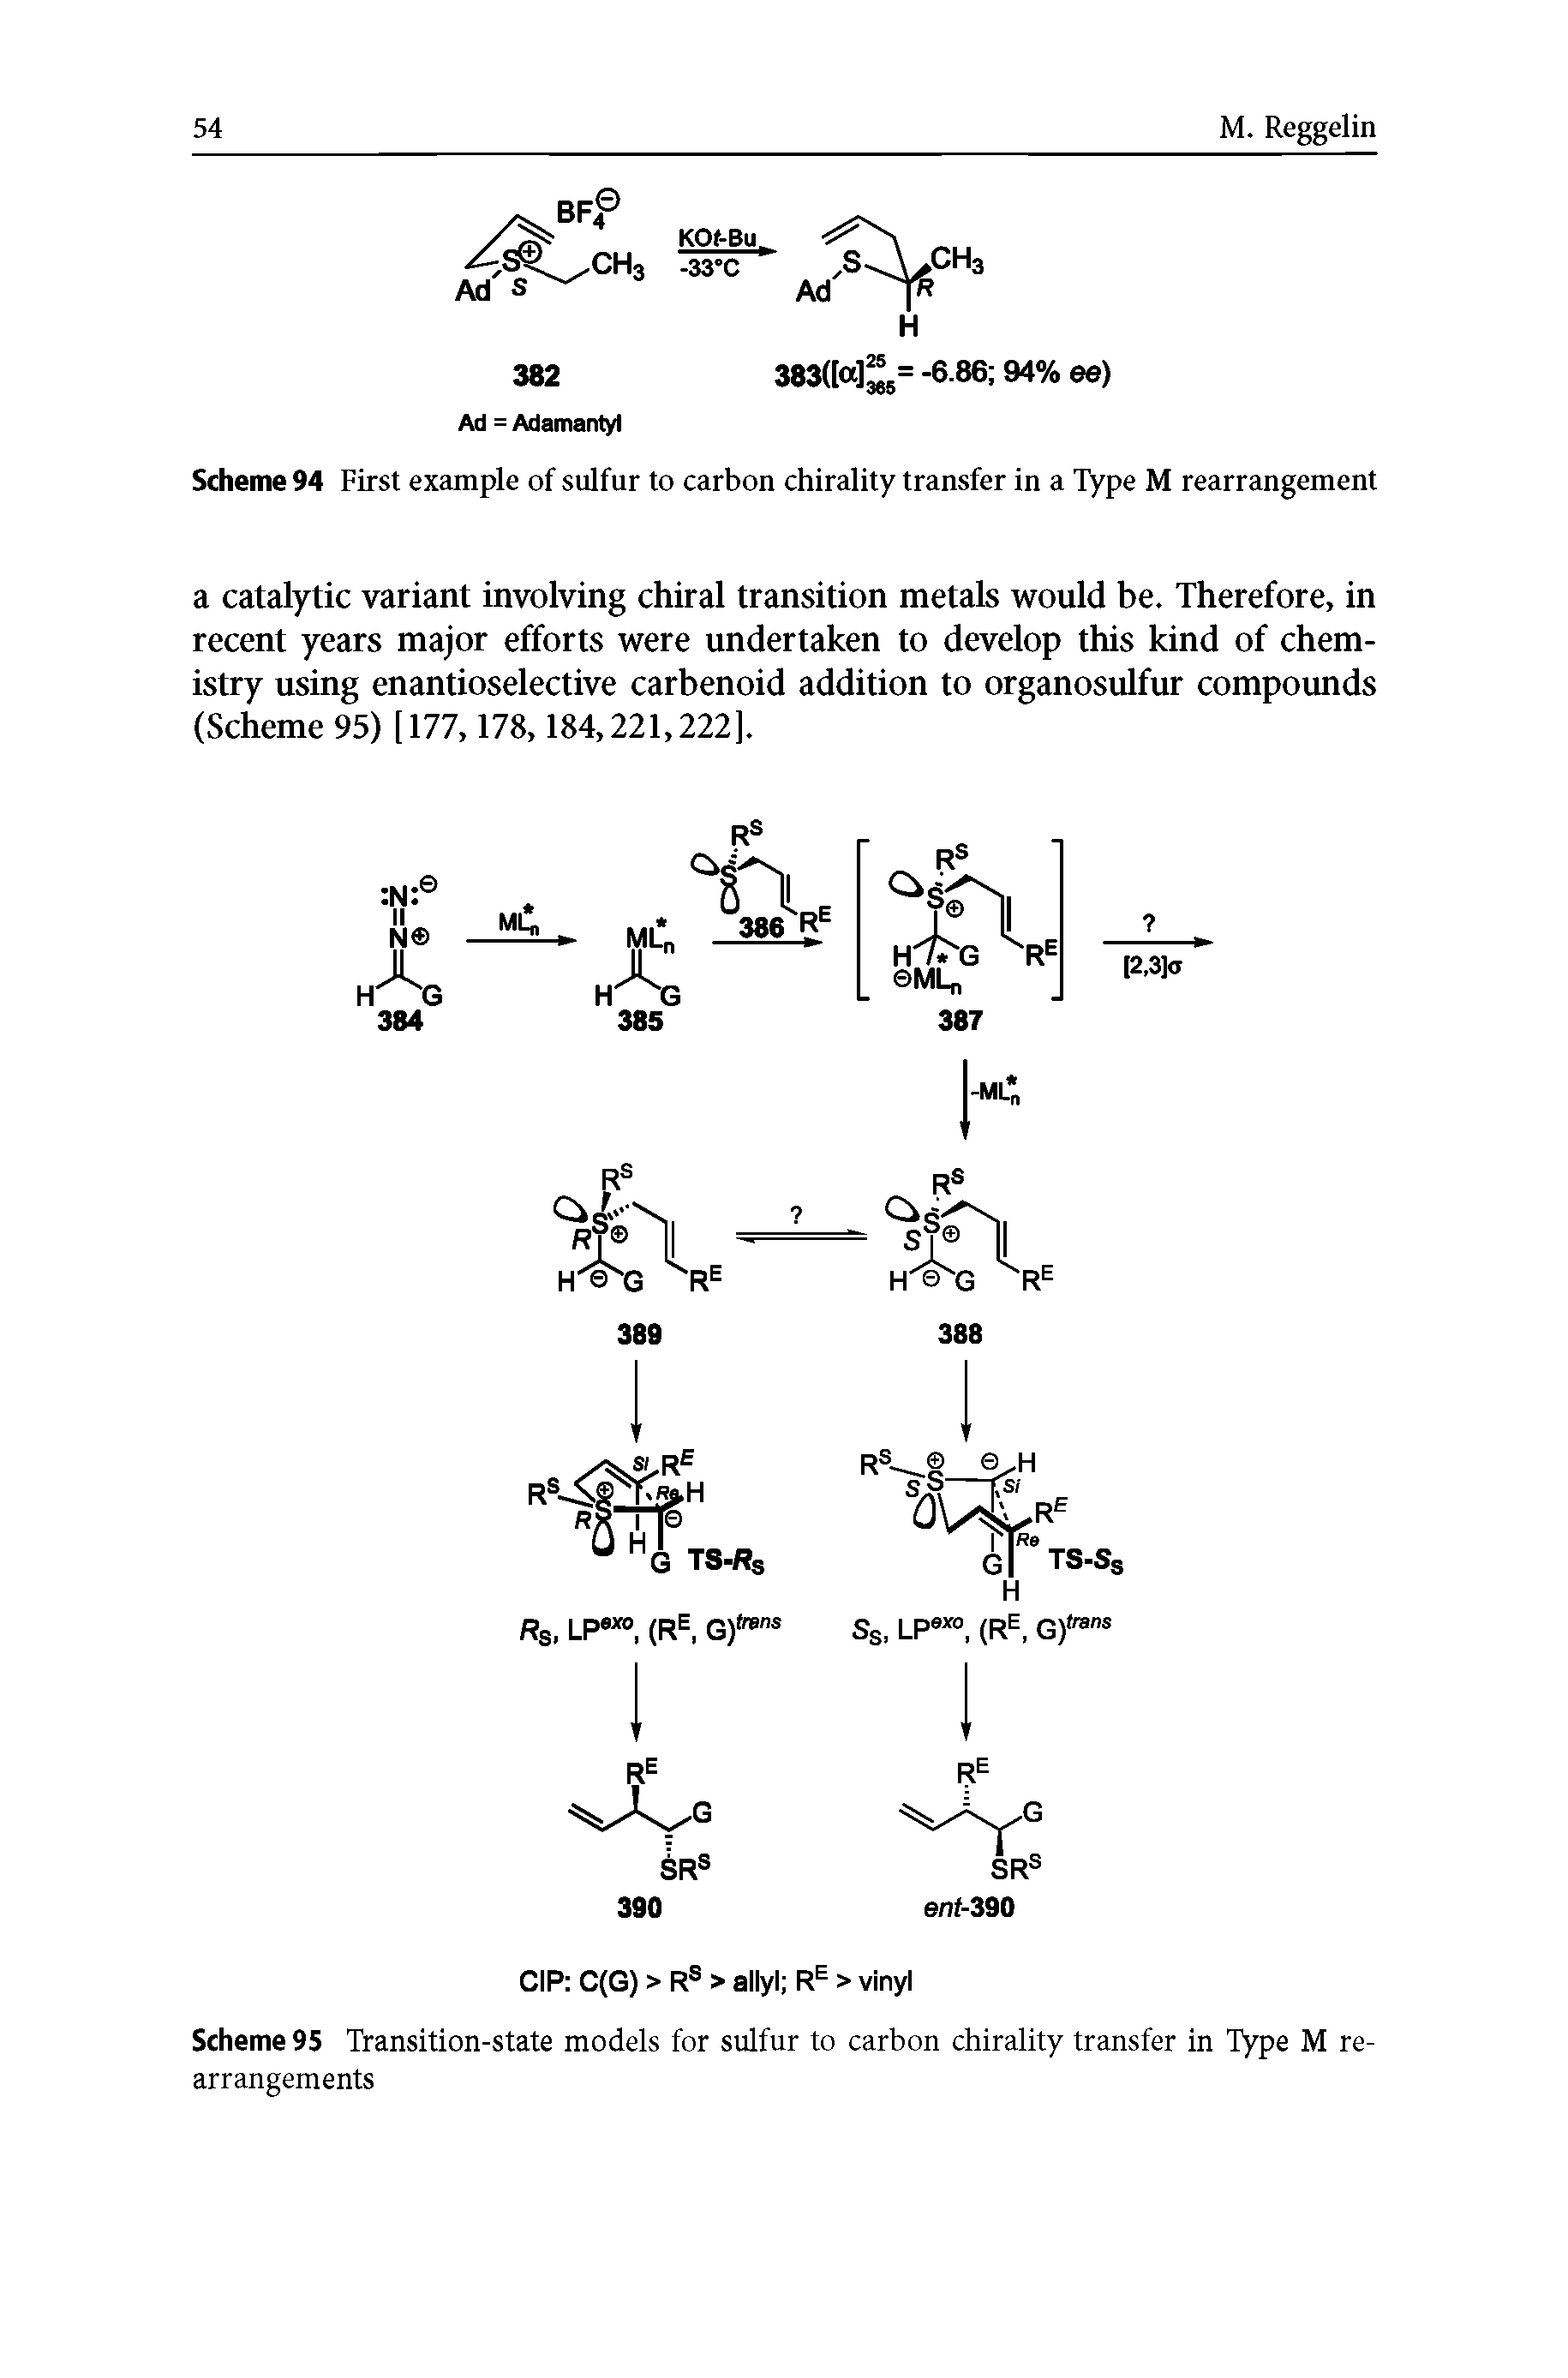 Scheme 94 First example of sulfur to carbon chirality transfer in a Type M rearrangement...